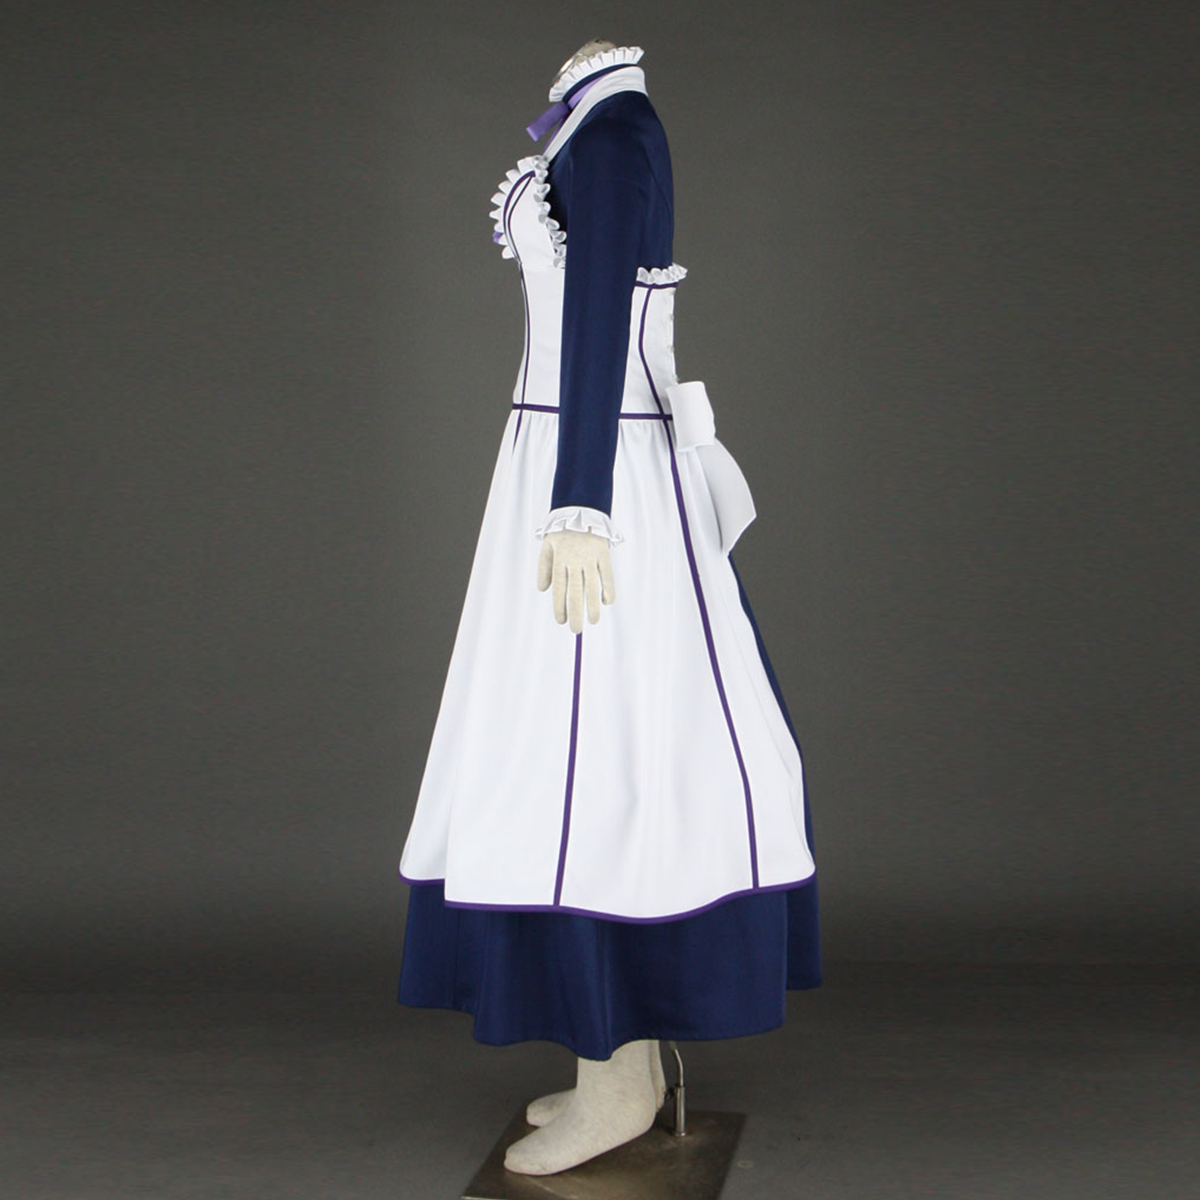 Black Butler Hannah Annafellows 1 Maid Anime Cosplay Costumes Outfit